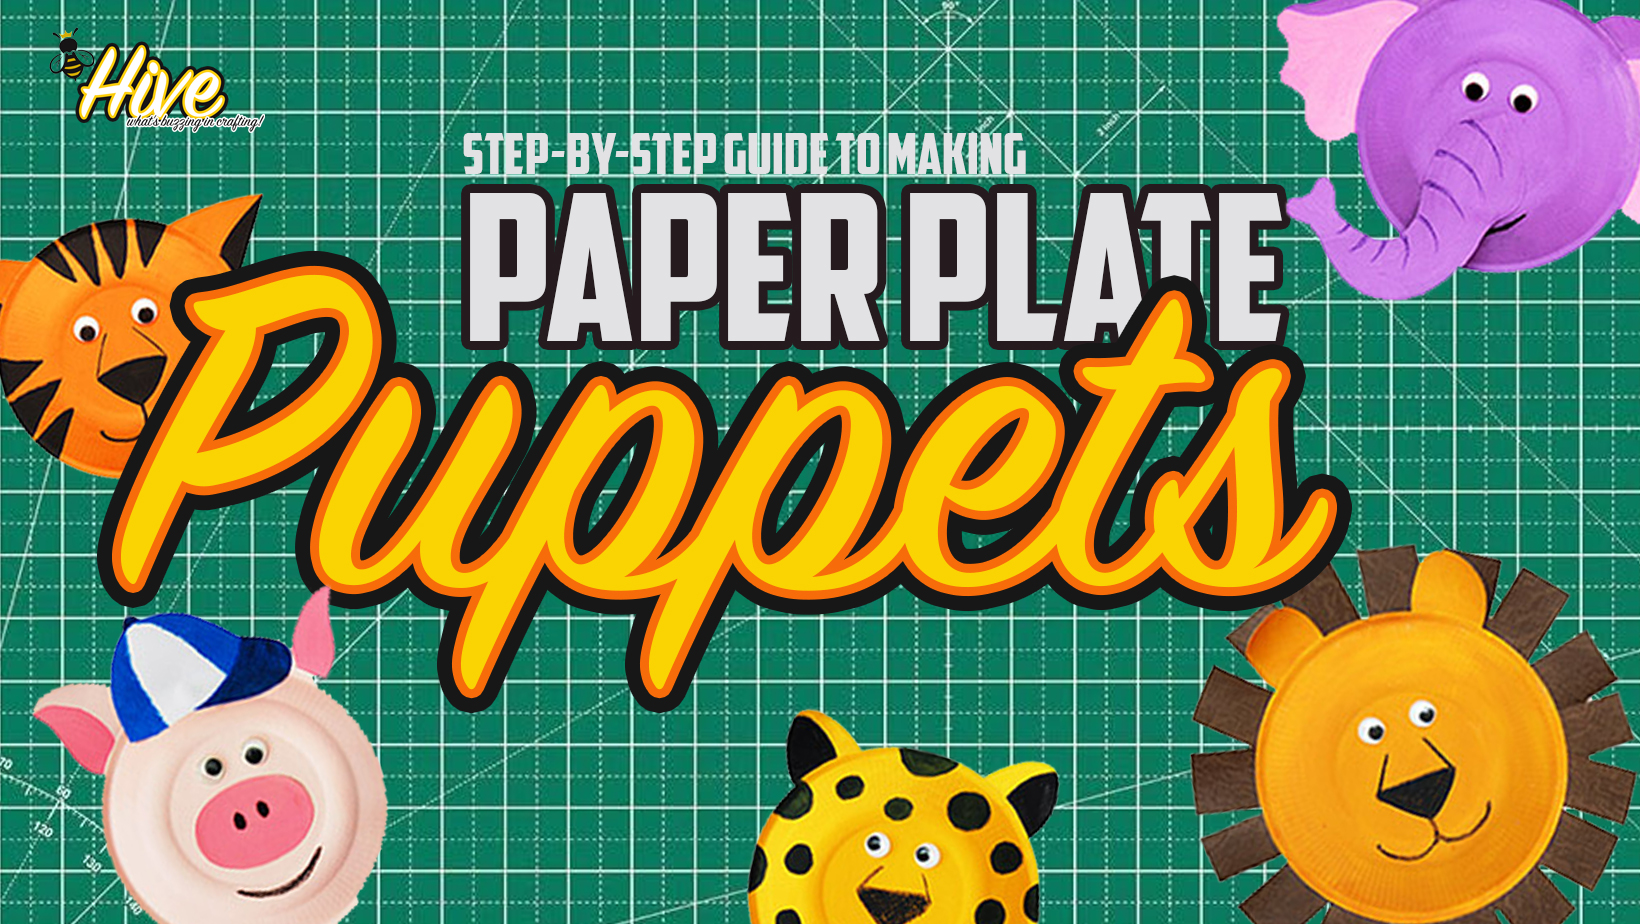 Creating Paper Plate Puppets with Your Kids